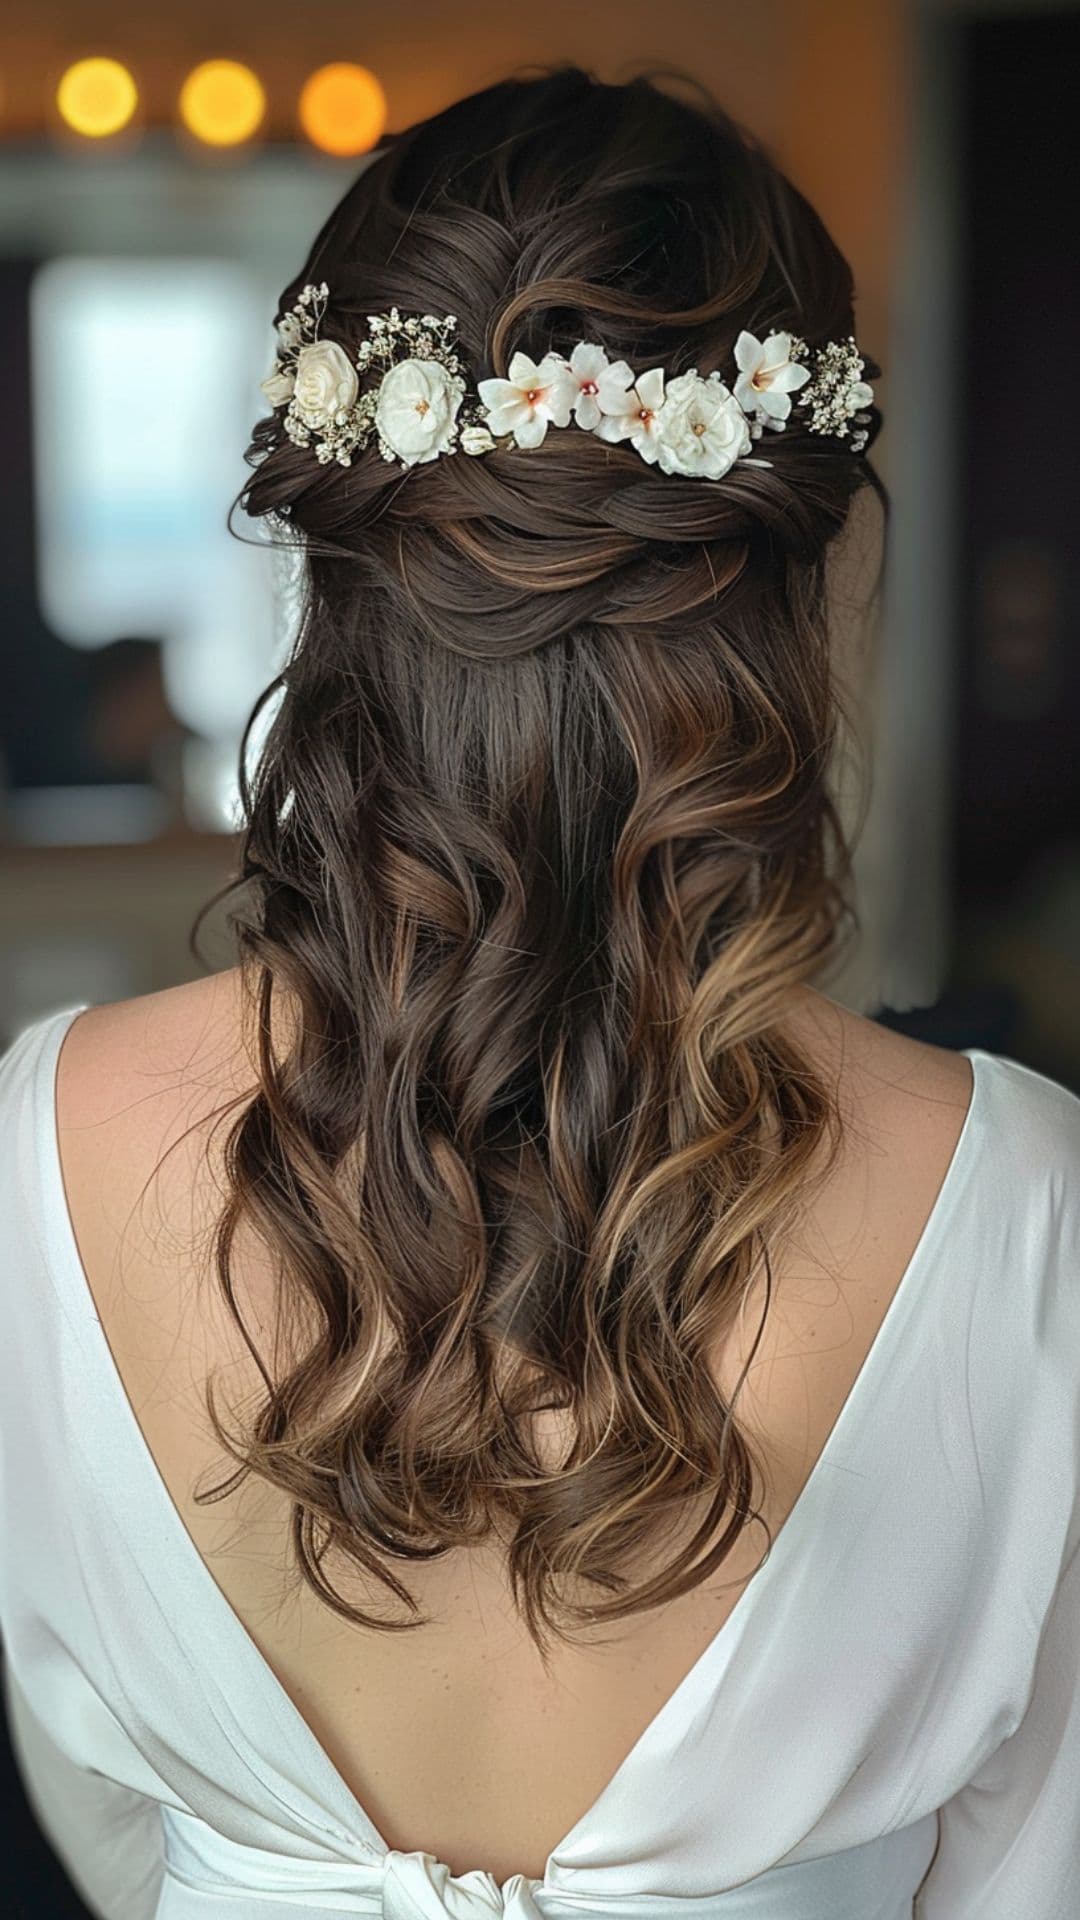 A woman modelling a half-up with flower accessories hairstyle.